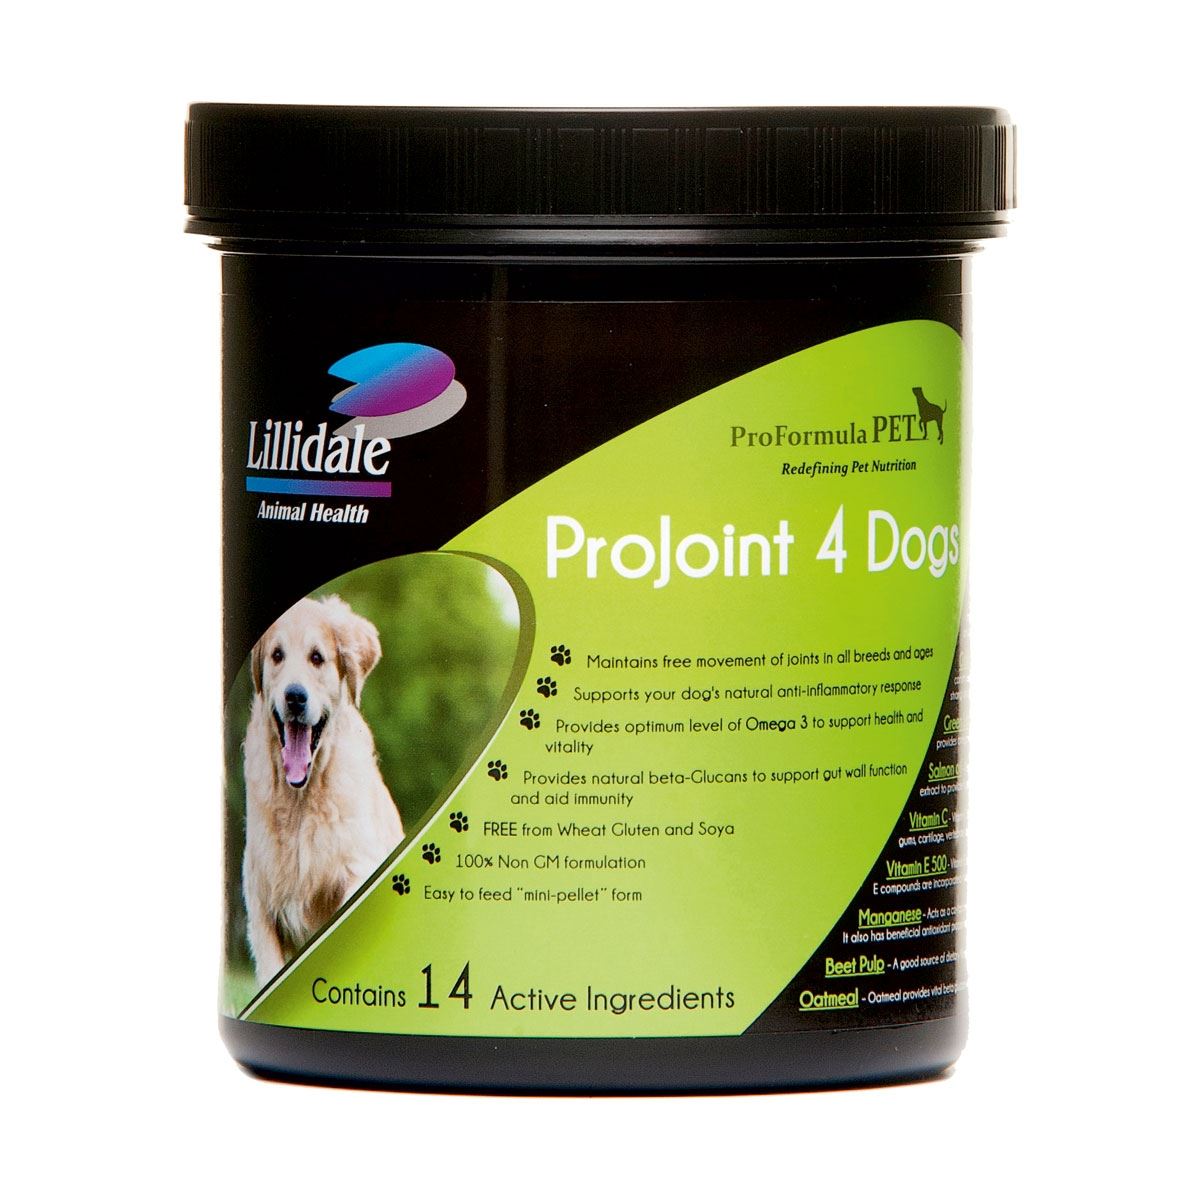 Lillidale ProJoint 4 Dogs - Just Horse Riders